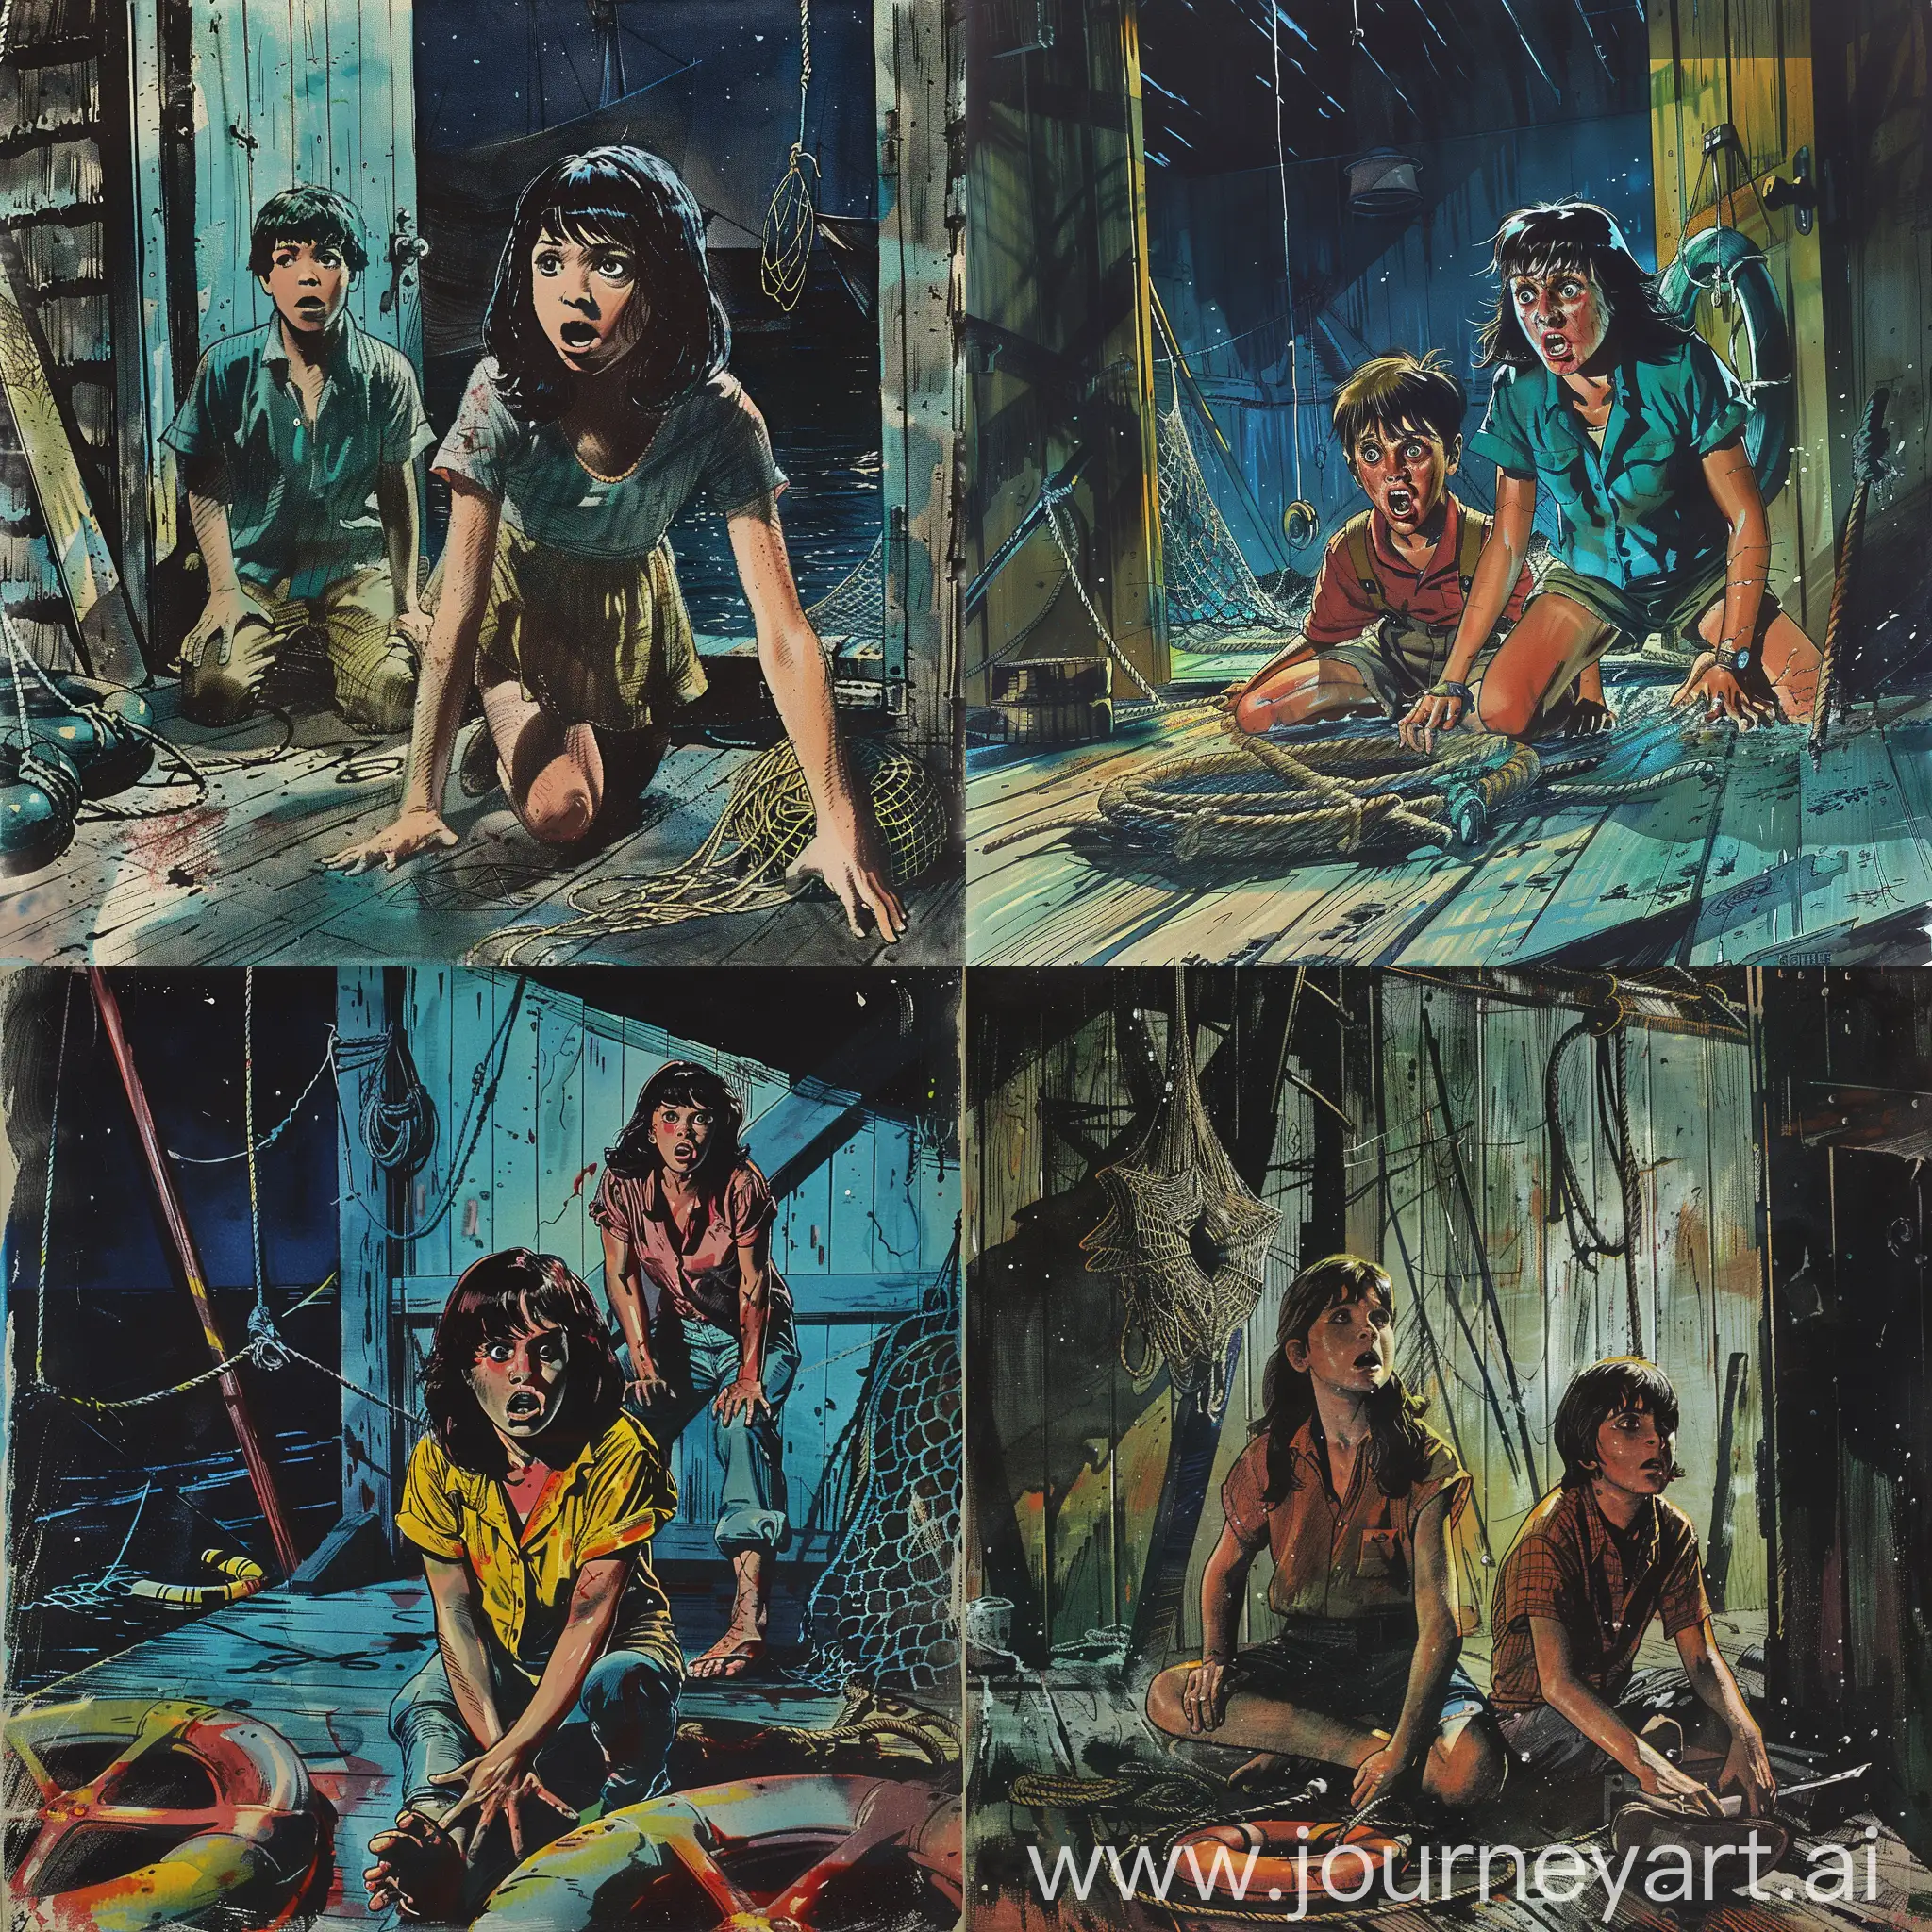 Style of a 1970’s horror comic book cover, no text, influenced by Eerie, House of Mystery, Haunt of Horror. Setting is inside a fishing cabin at the end of a pier at night featuring a couple of buoys, fishing poles and fishing nets. A girl and boy sit on the floor and have shocked looks on their faces, realistic hands and eyes, they moved large sail sheet and found a pentagram on the floor. A high priestess with a beautiful face and dark hair opens the door and find them.